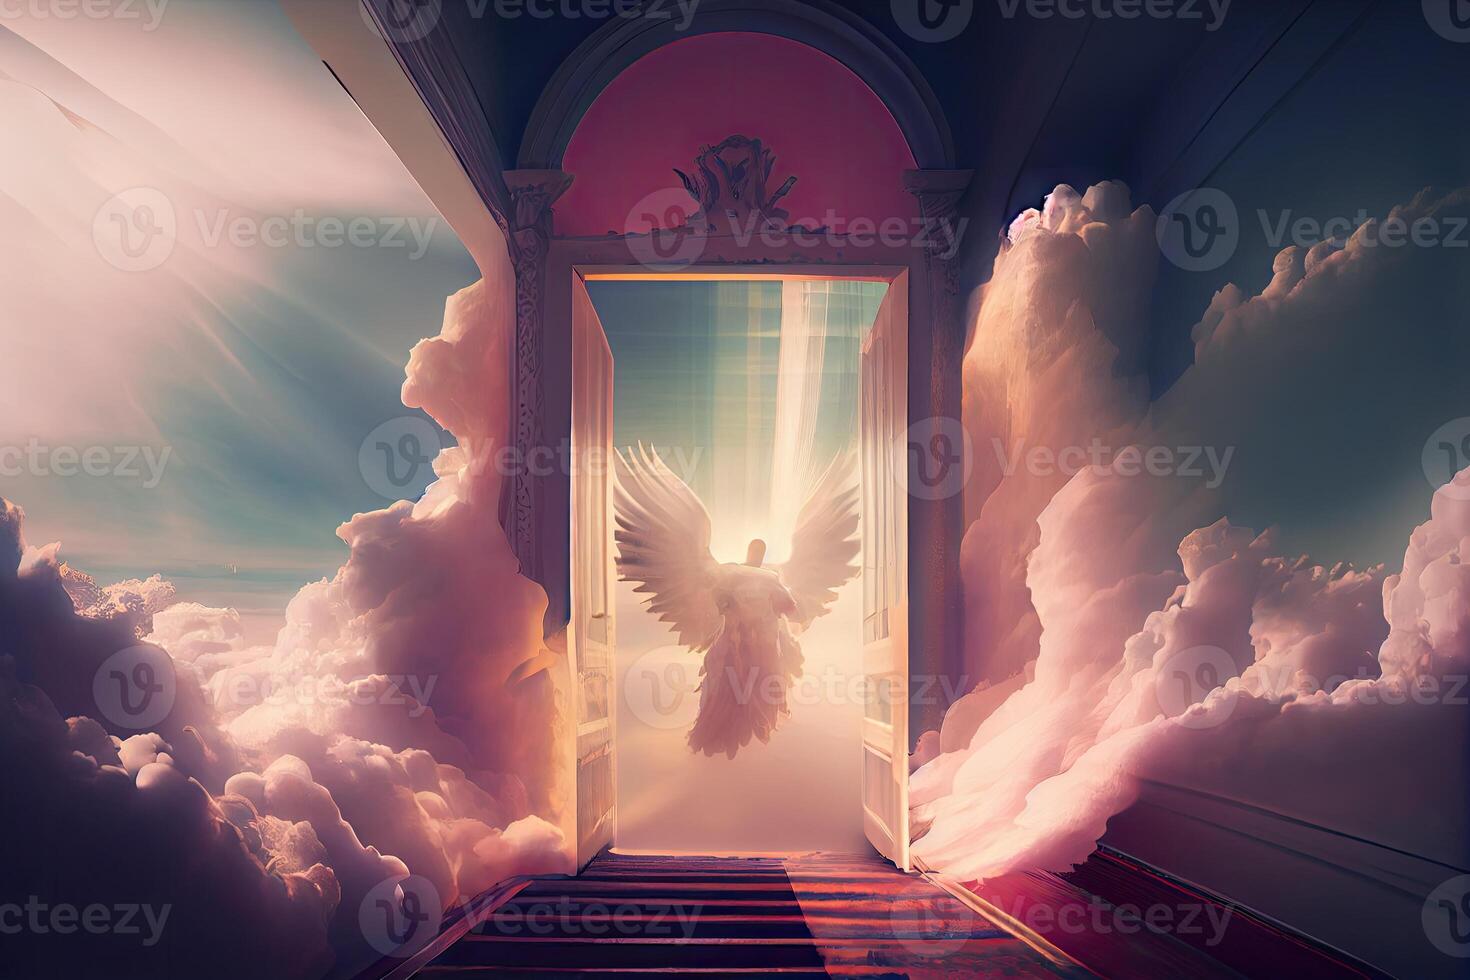 beautiful illustration of Heaven that showcases its divine and celestial qualities, photo